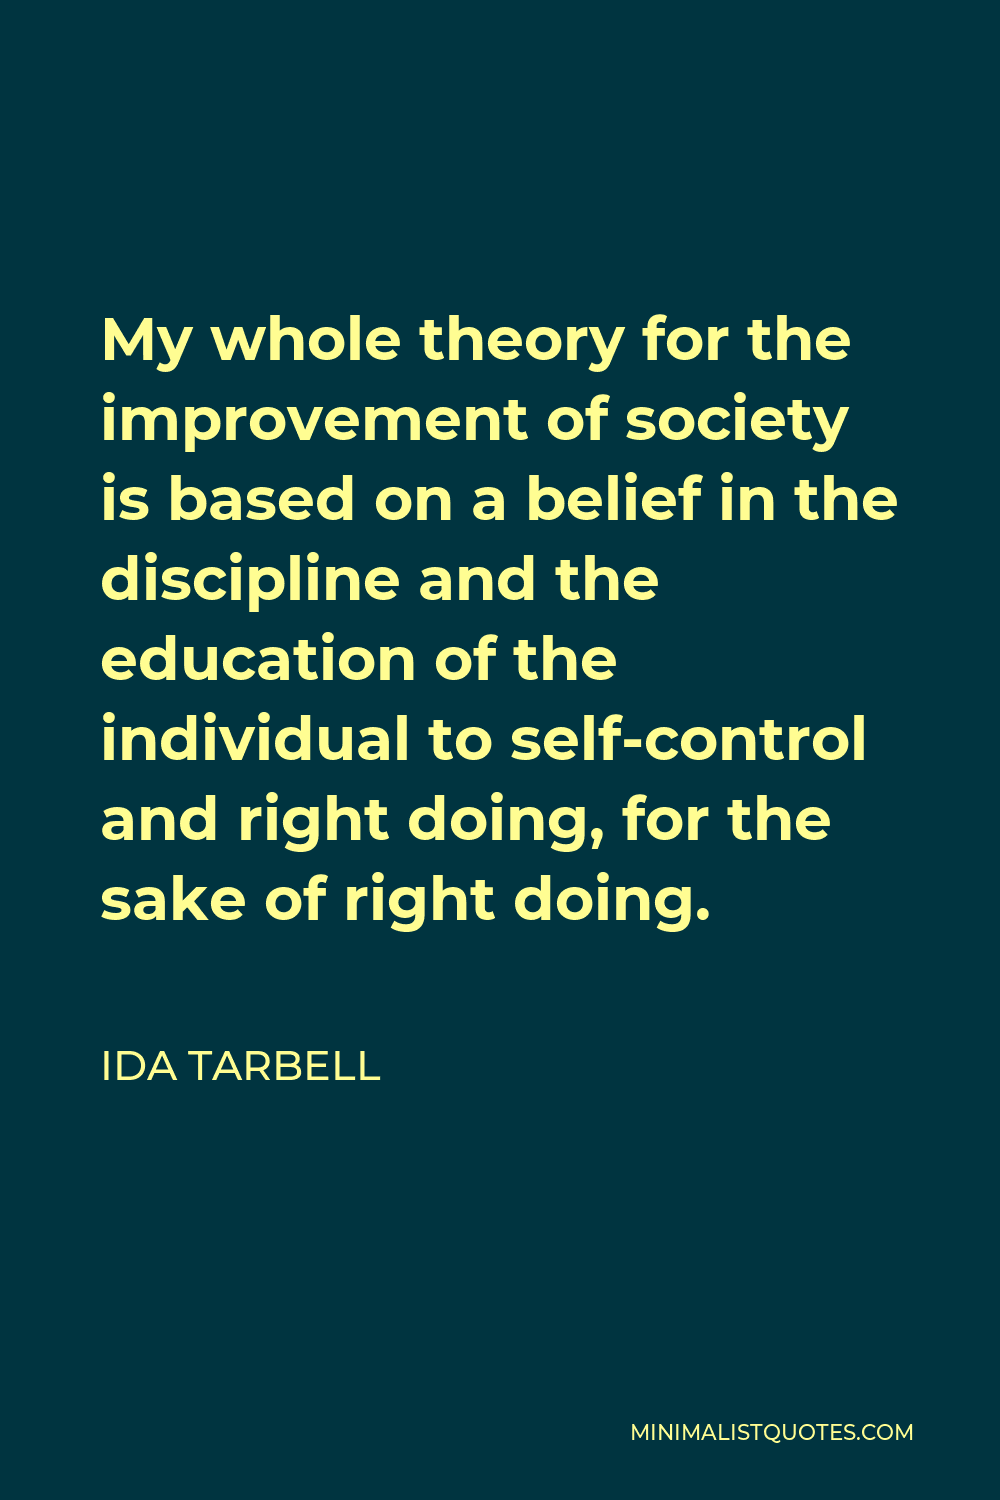 Ida Tarbell Quote - My whole theory for the improvement of society is based on a belief in the discipline and the education of the individual to self-control and right doing, for the sake of right doing.